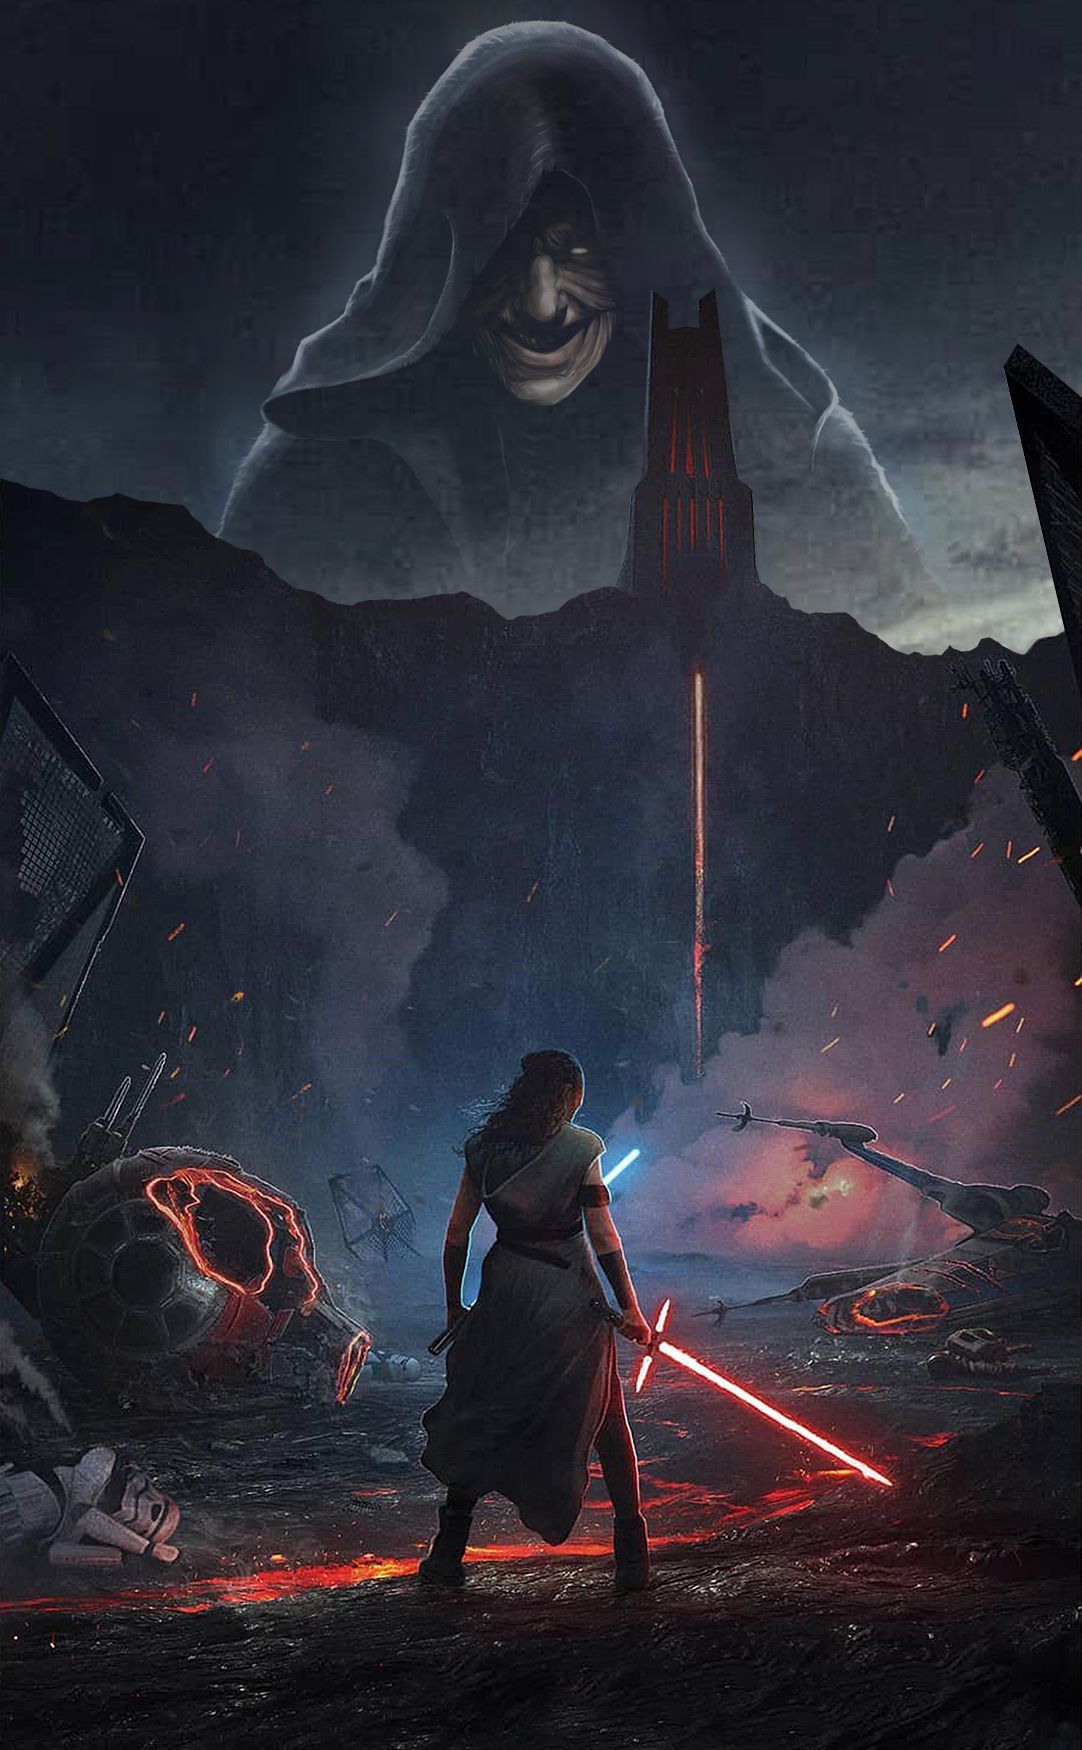 The Rise of Skywalker. The Return of Sidious. Star wars picture, Star wars image, Star wars painting